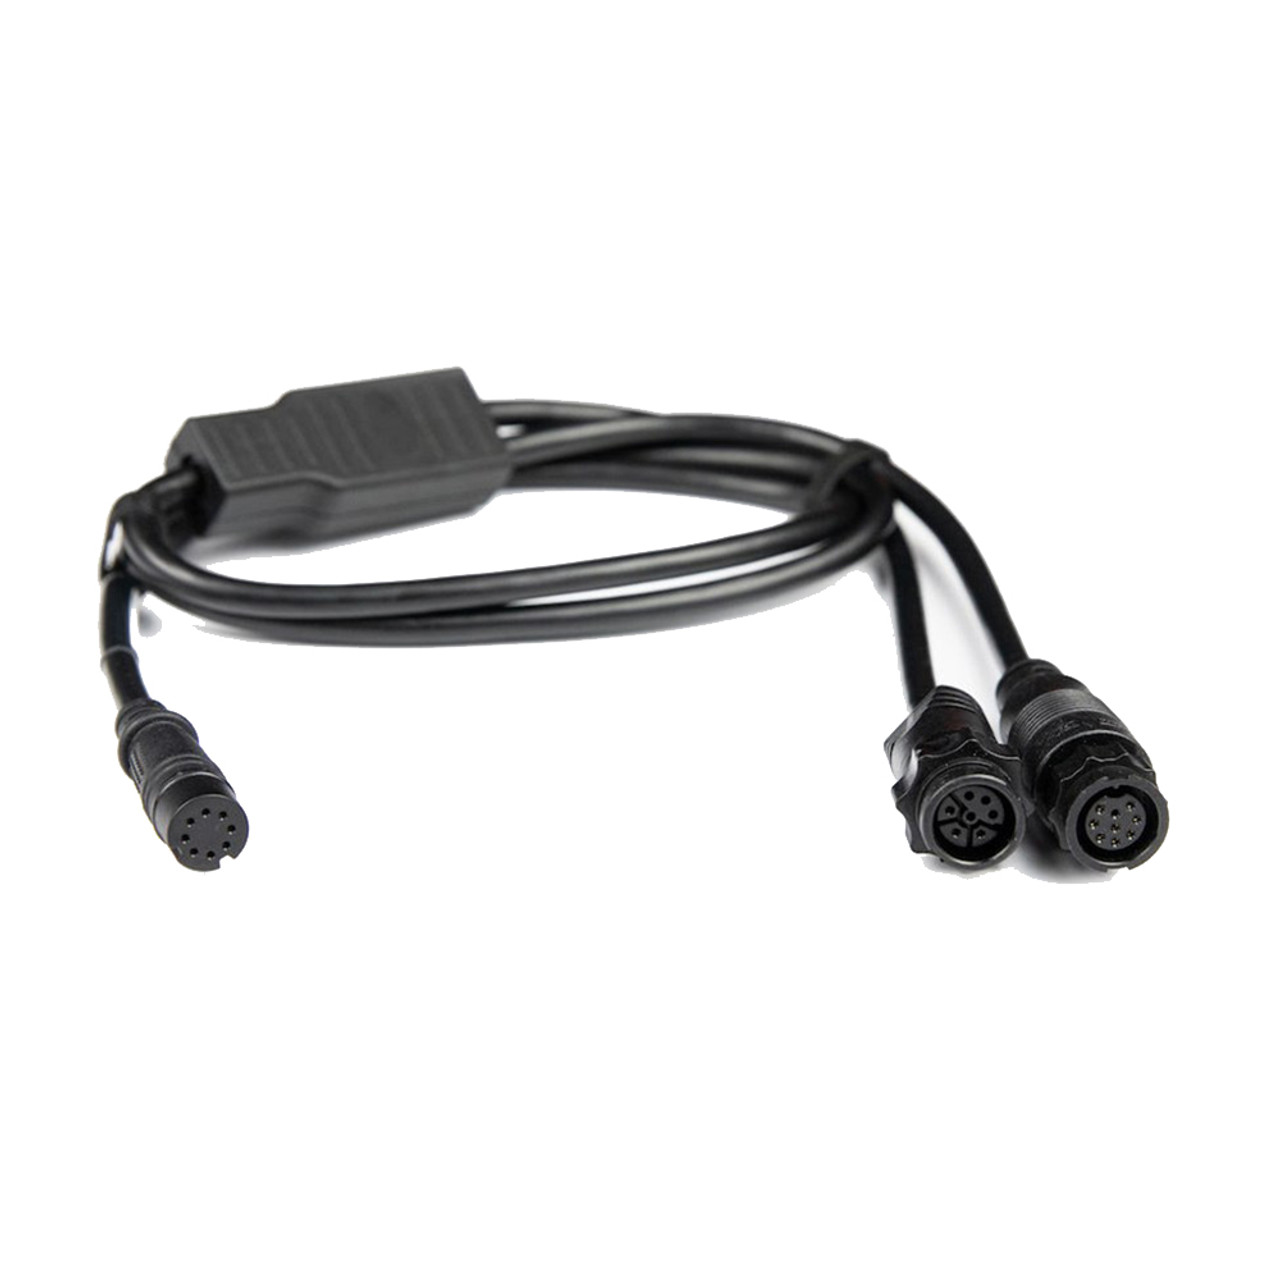 Lowrance HOOK²/Reveal Transducer Y-Cable [000-14412-001]